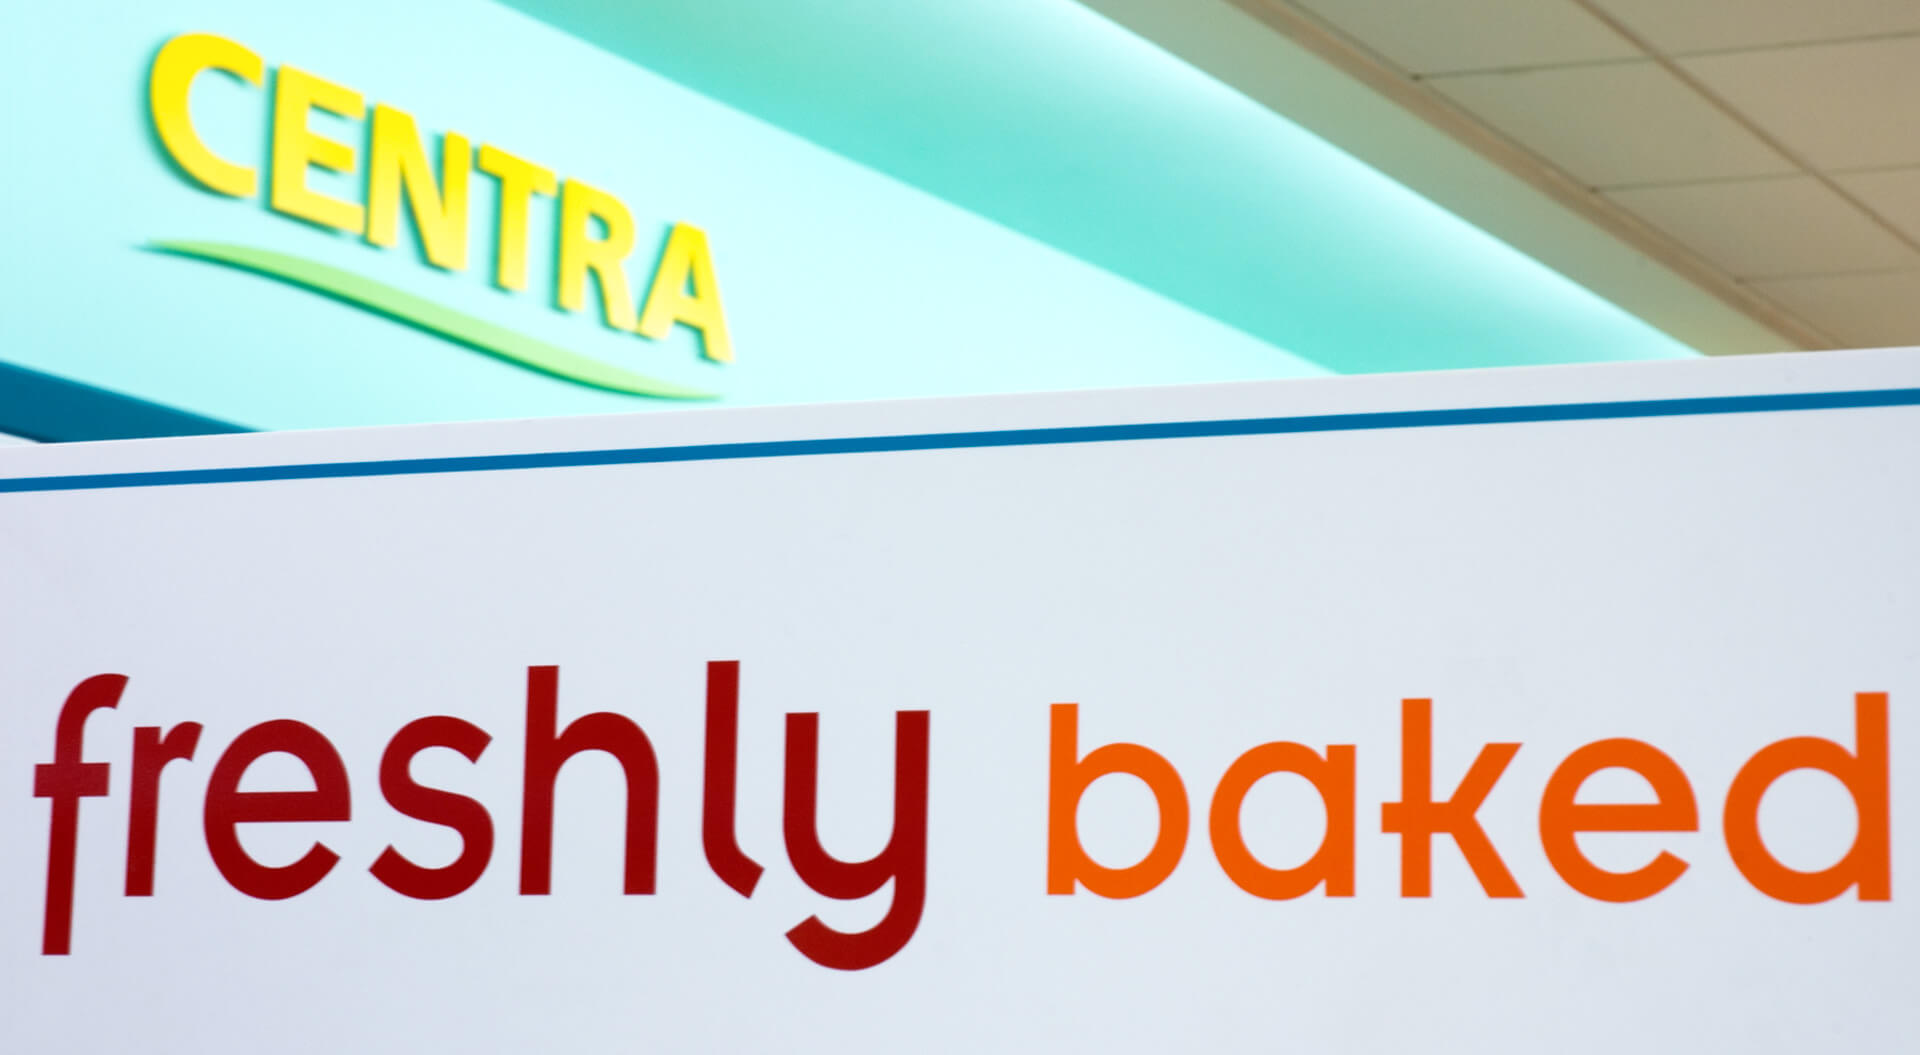 Centra conveince stores in-store freshly baked branding